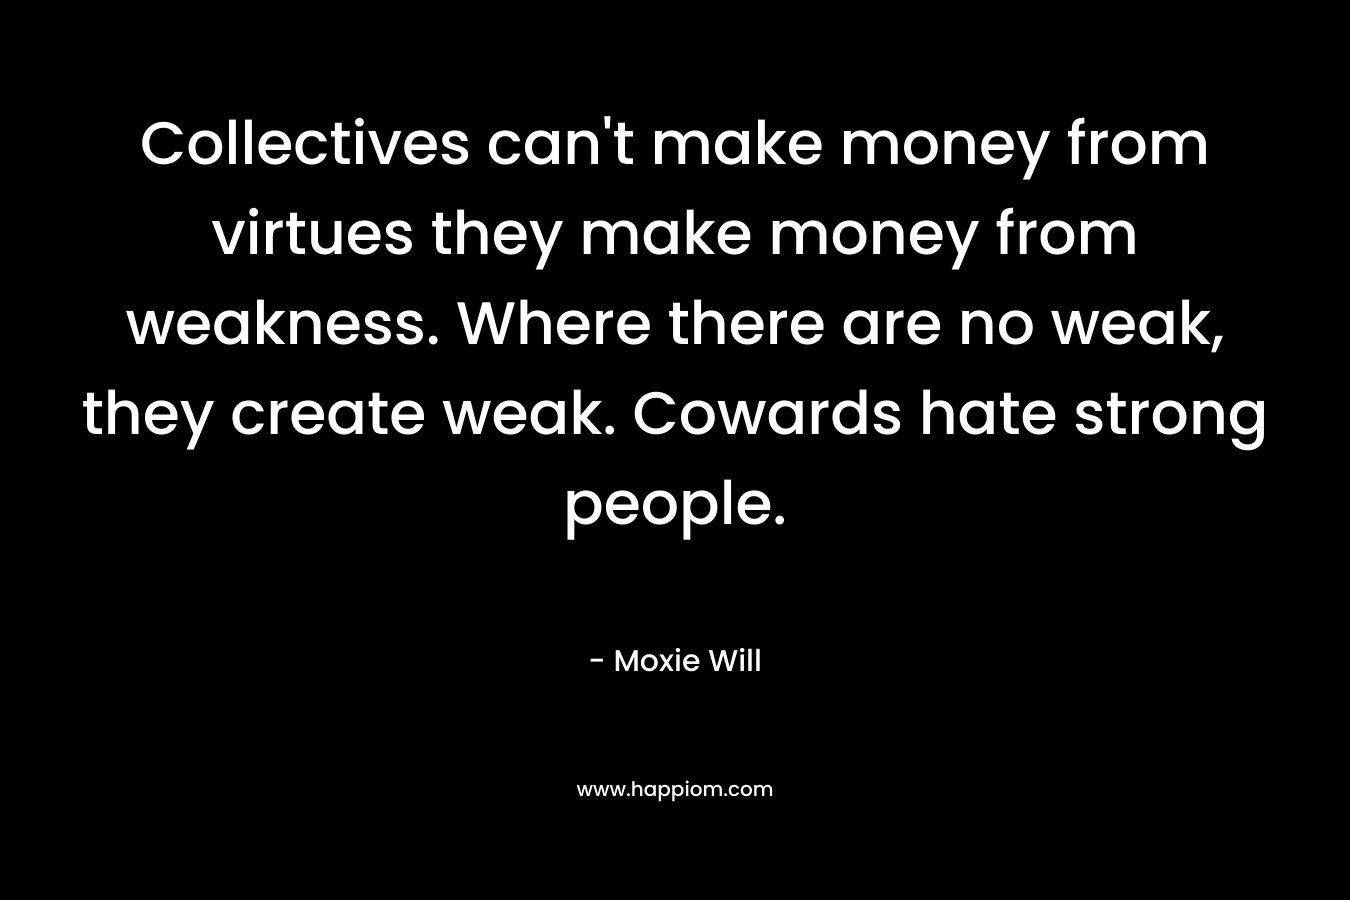 Collectives can't make money from virtues they make money from weakness. Where there are no weak, they create weak. Cowards hate strong people.